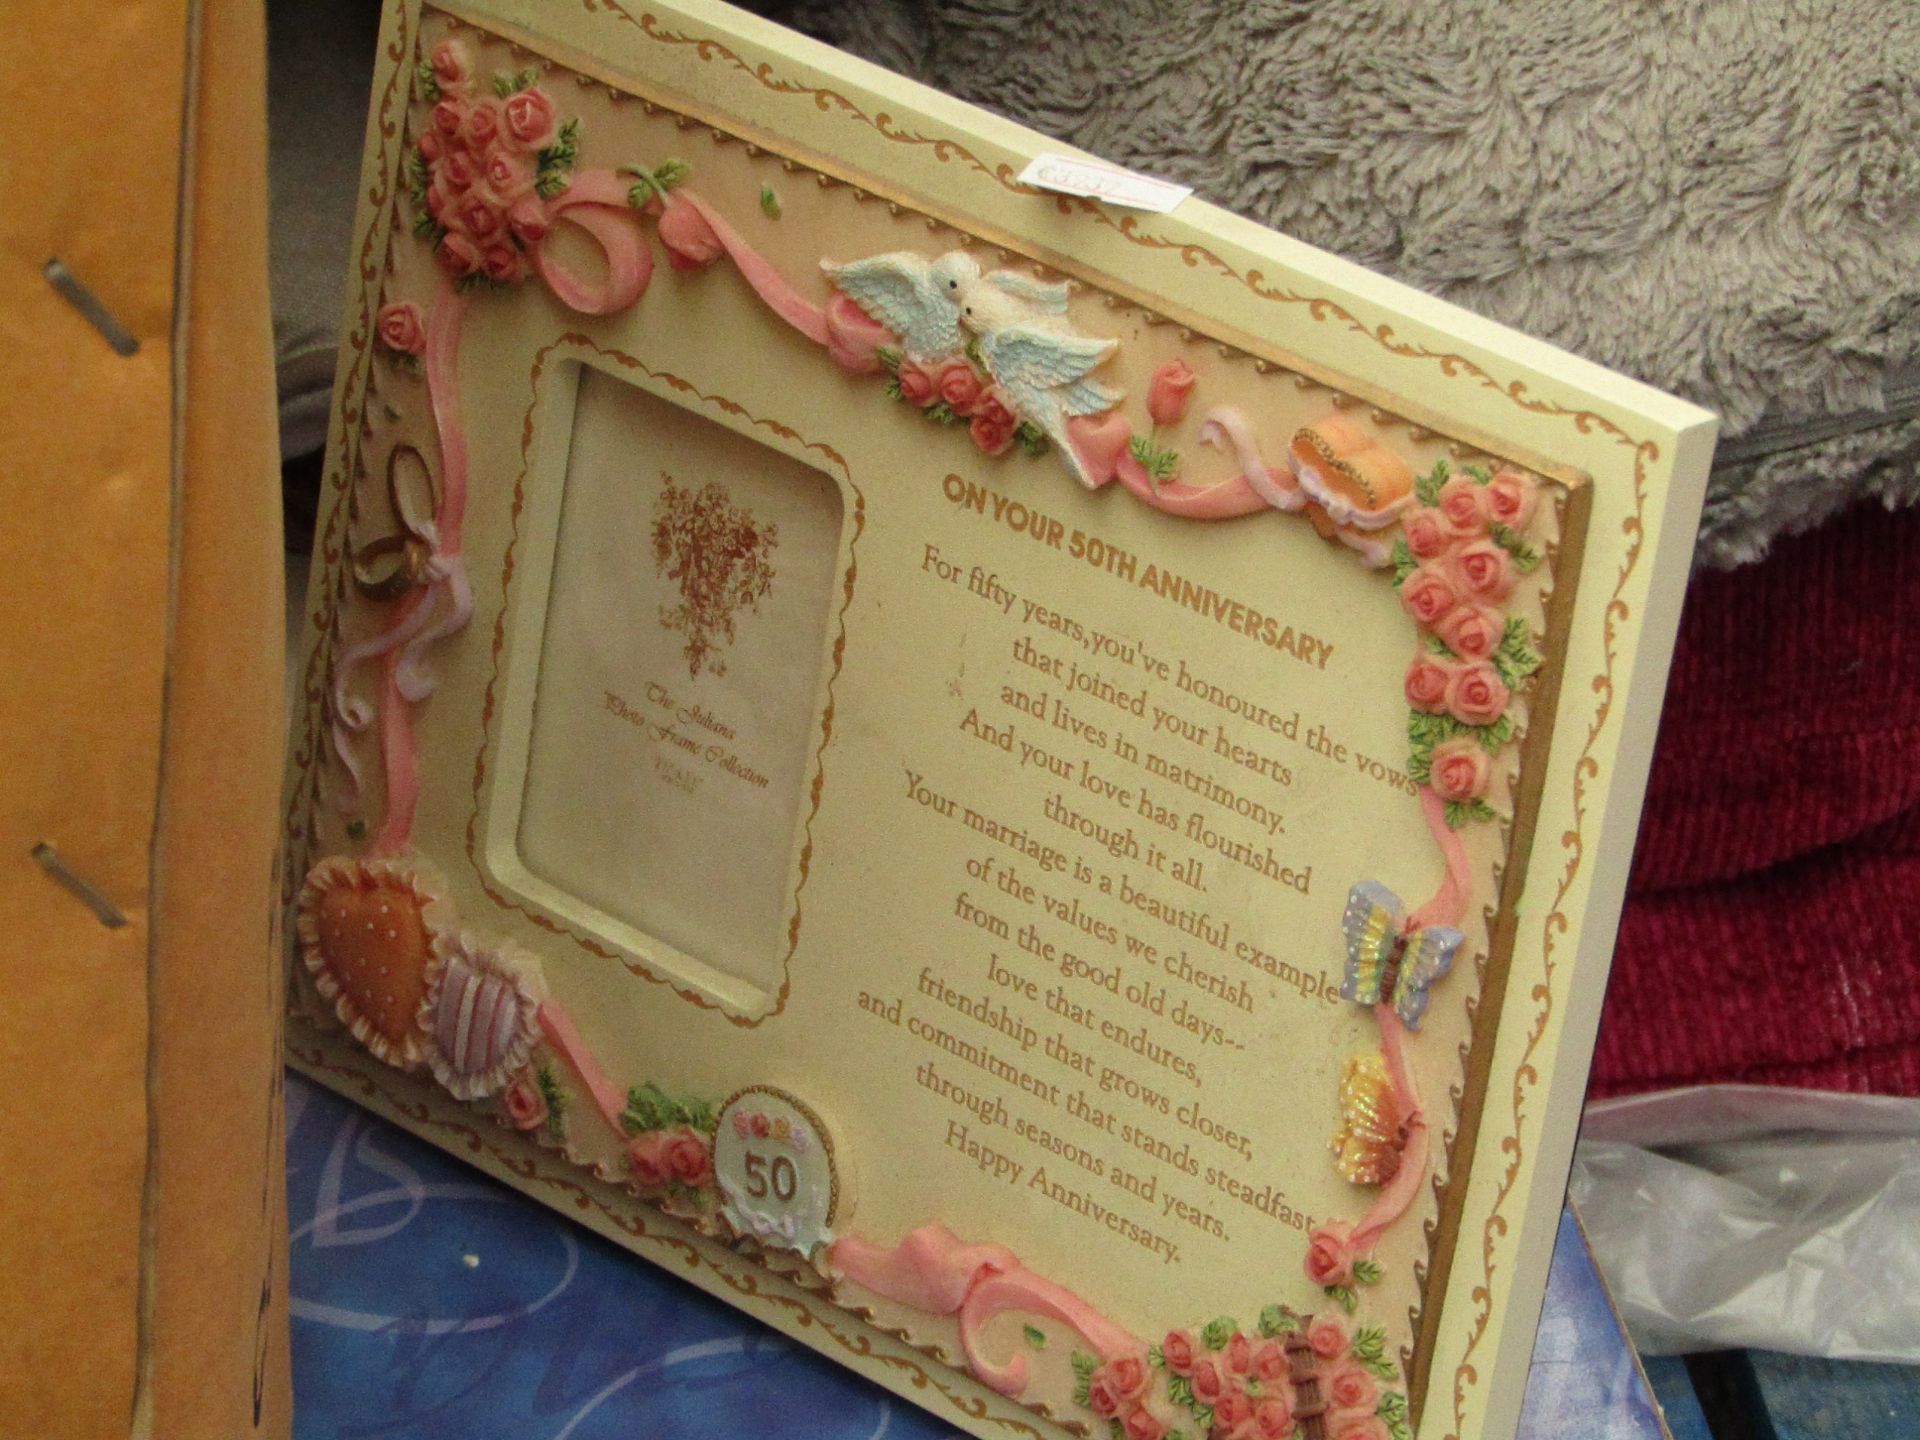 4x 50th anniversary frame presents with poem and picture frame (6cm x 9cm), all unchecked and boxed